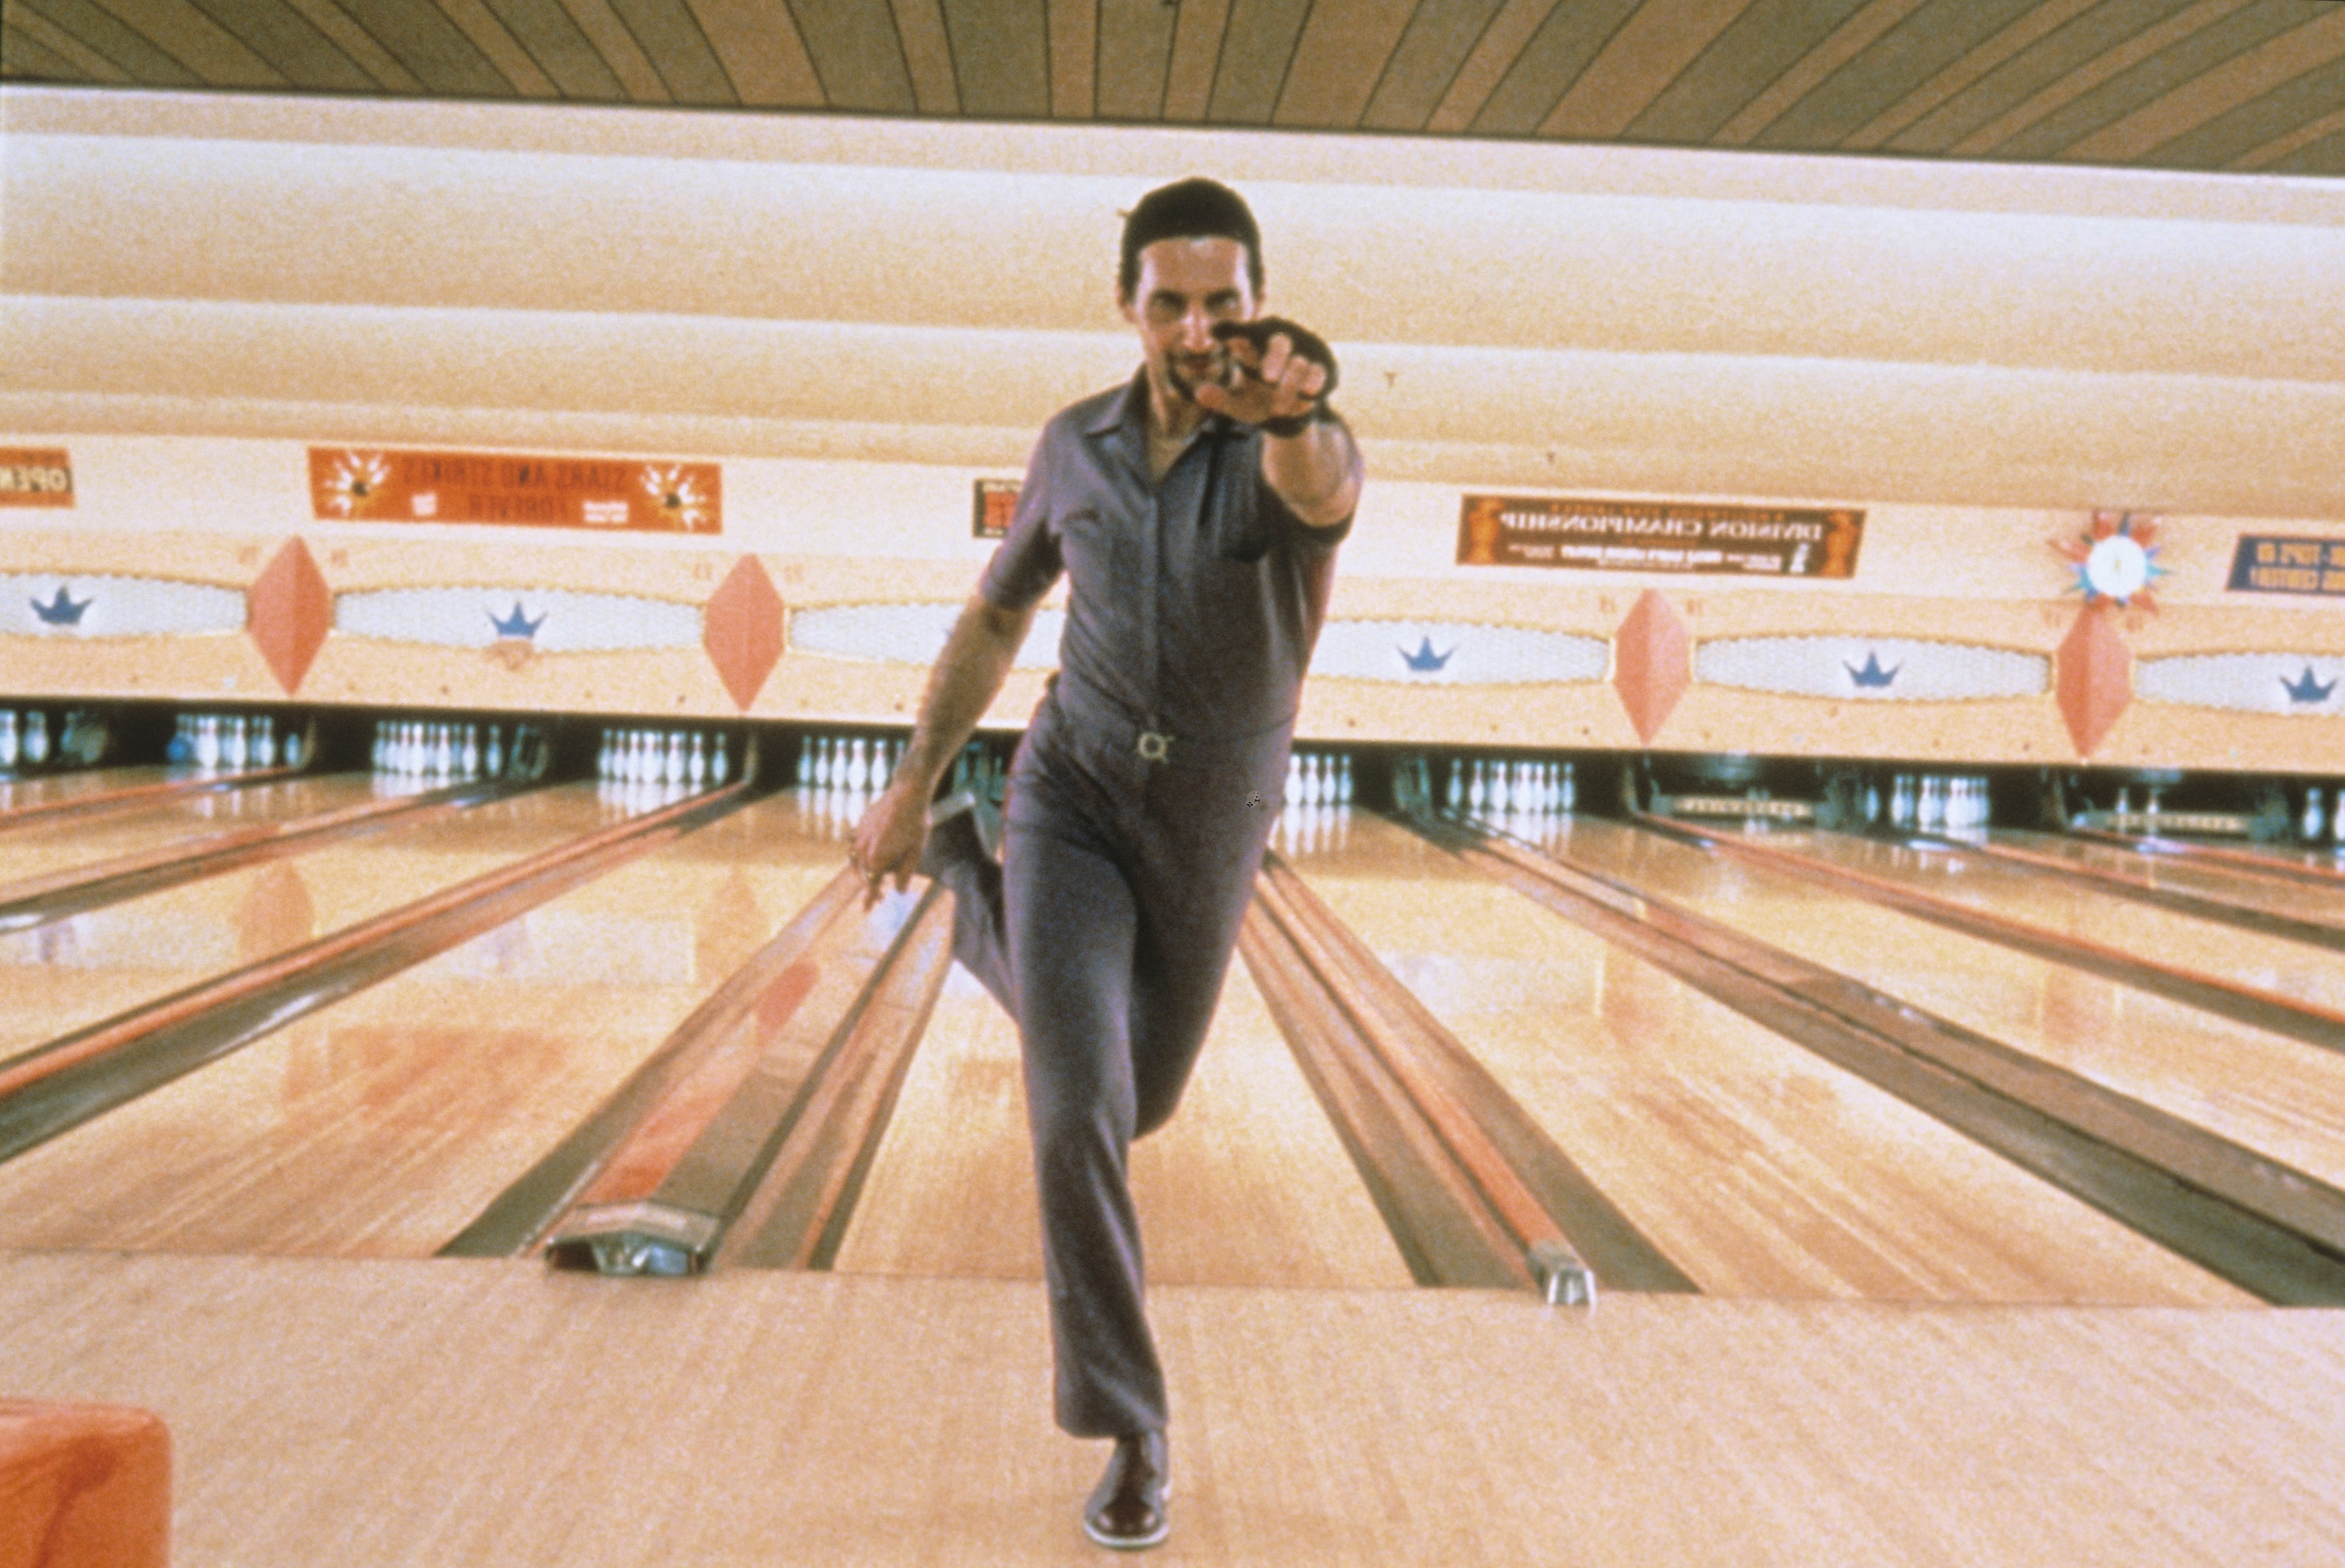 in a scene, John in a retro bowling shirt aims a bowling ball down the lane with intense focus